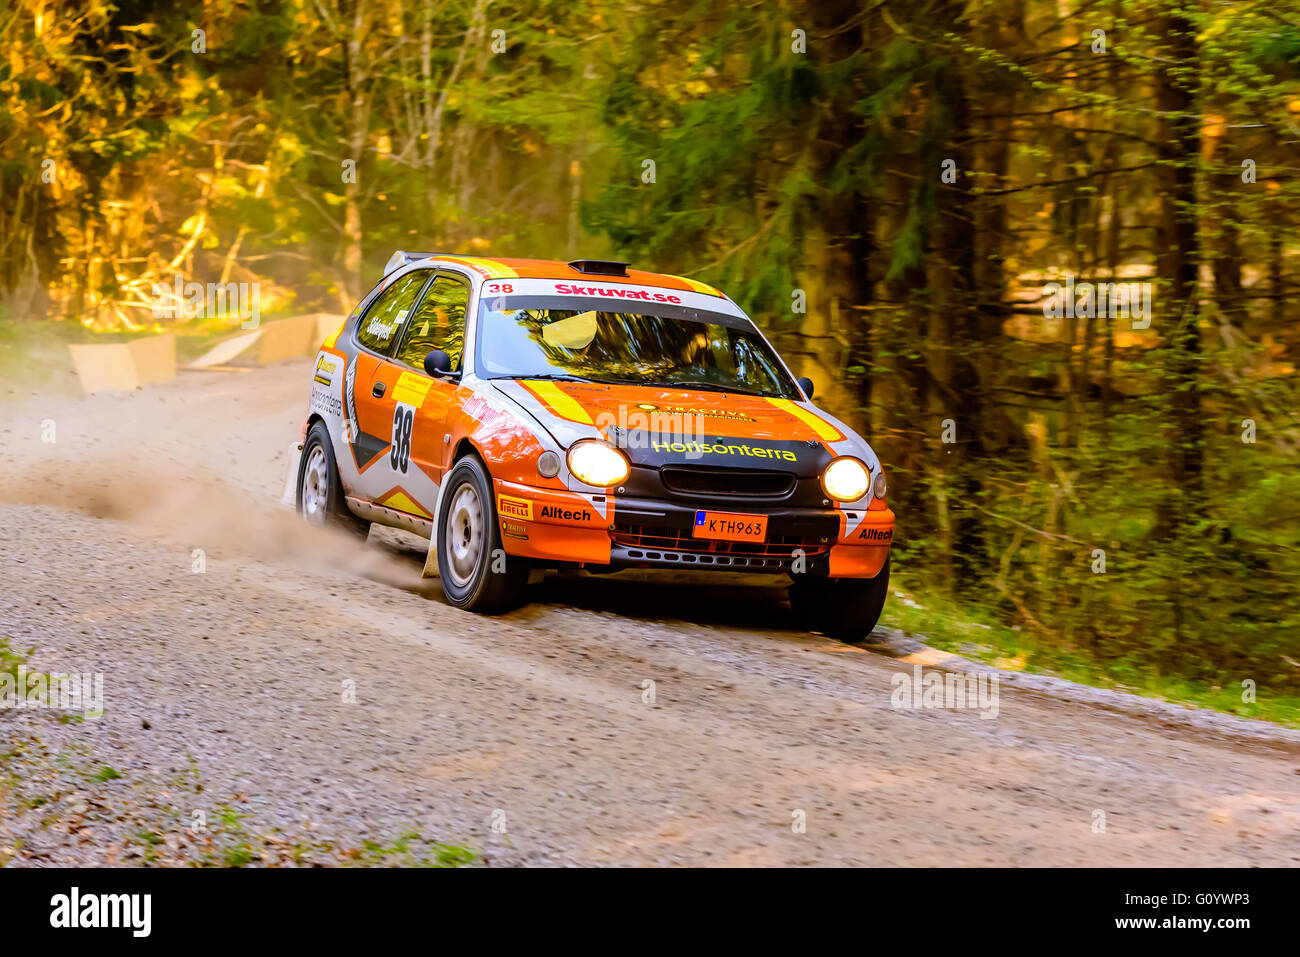 Karlskrona, Sweden. 6th May, 2016. 41st South Swedish Rally is on in the wild forest roads outside Karlskrona. Here is Tobias Soderqvist with codriver Joakim Soderqvist from AMF Arsunda on special road section 2 in their Toyota Corolla. They are todays winners in the trimmed 2WD class after a total of 4 sections. Credit:  Ingemar Magnusson/Alamy Live News Stock Photo